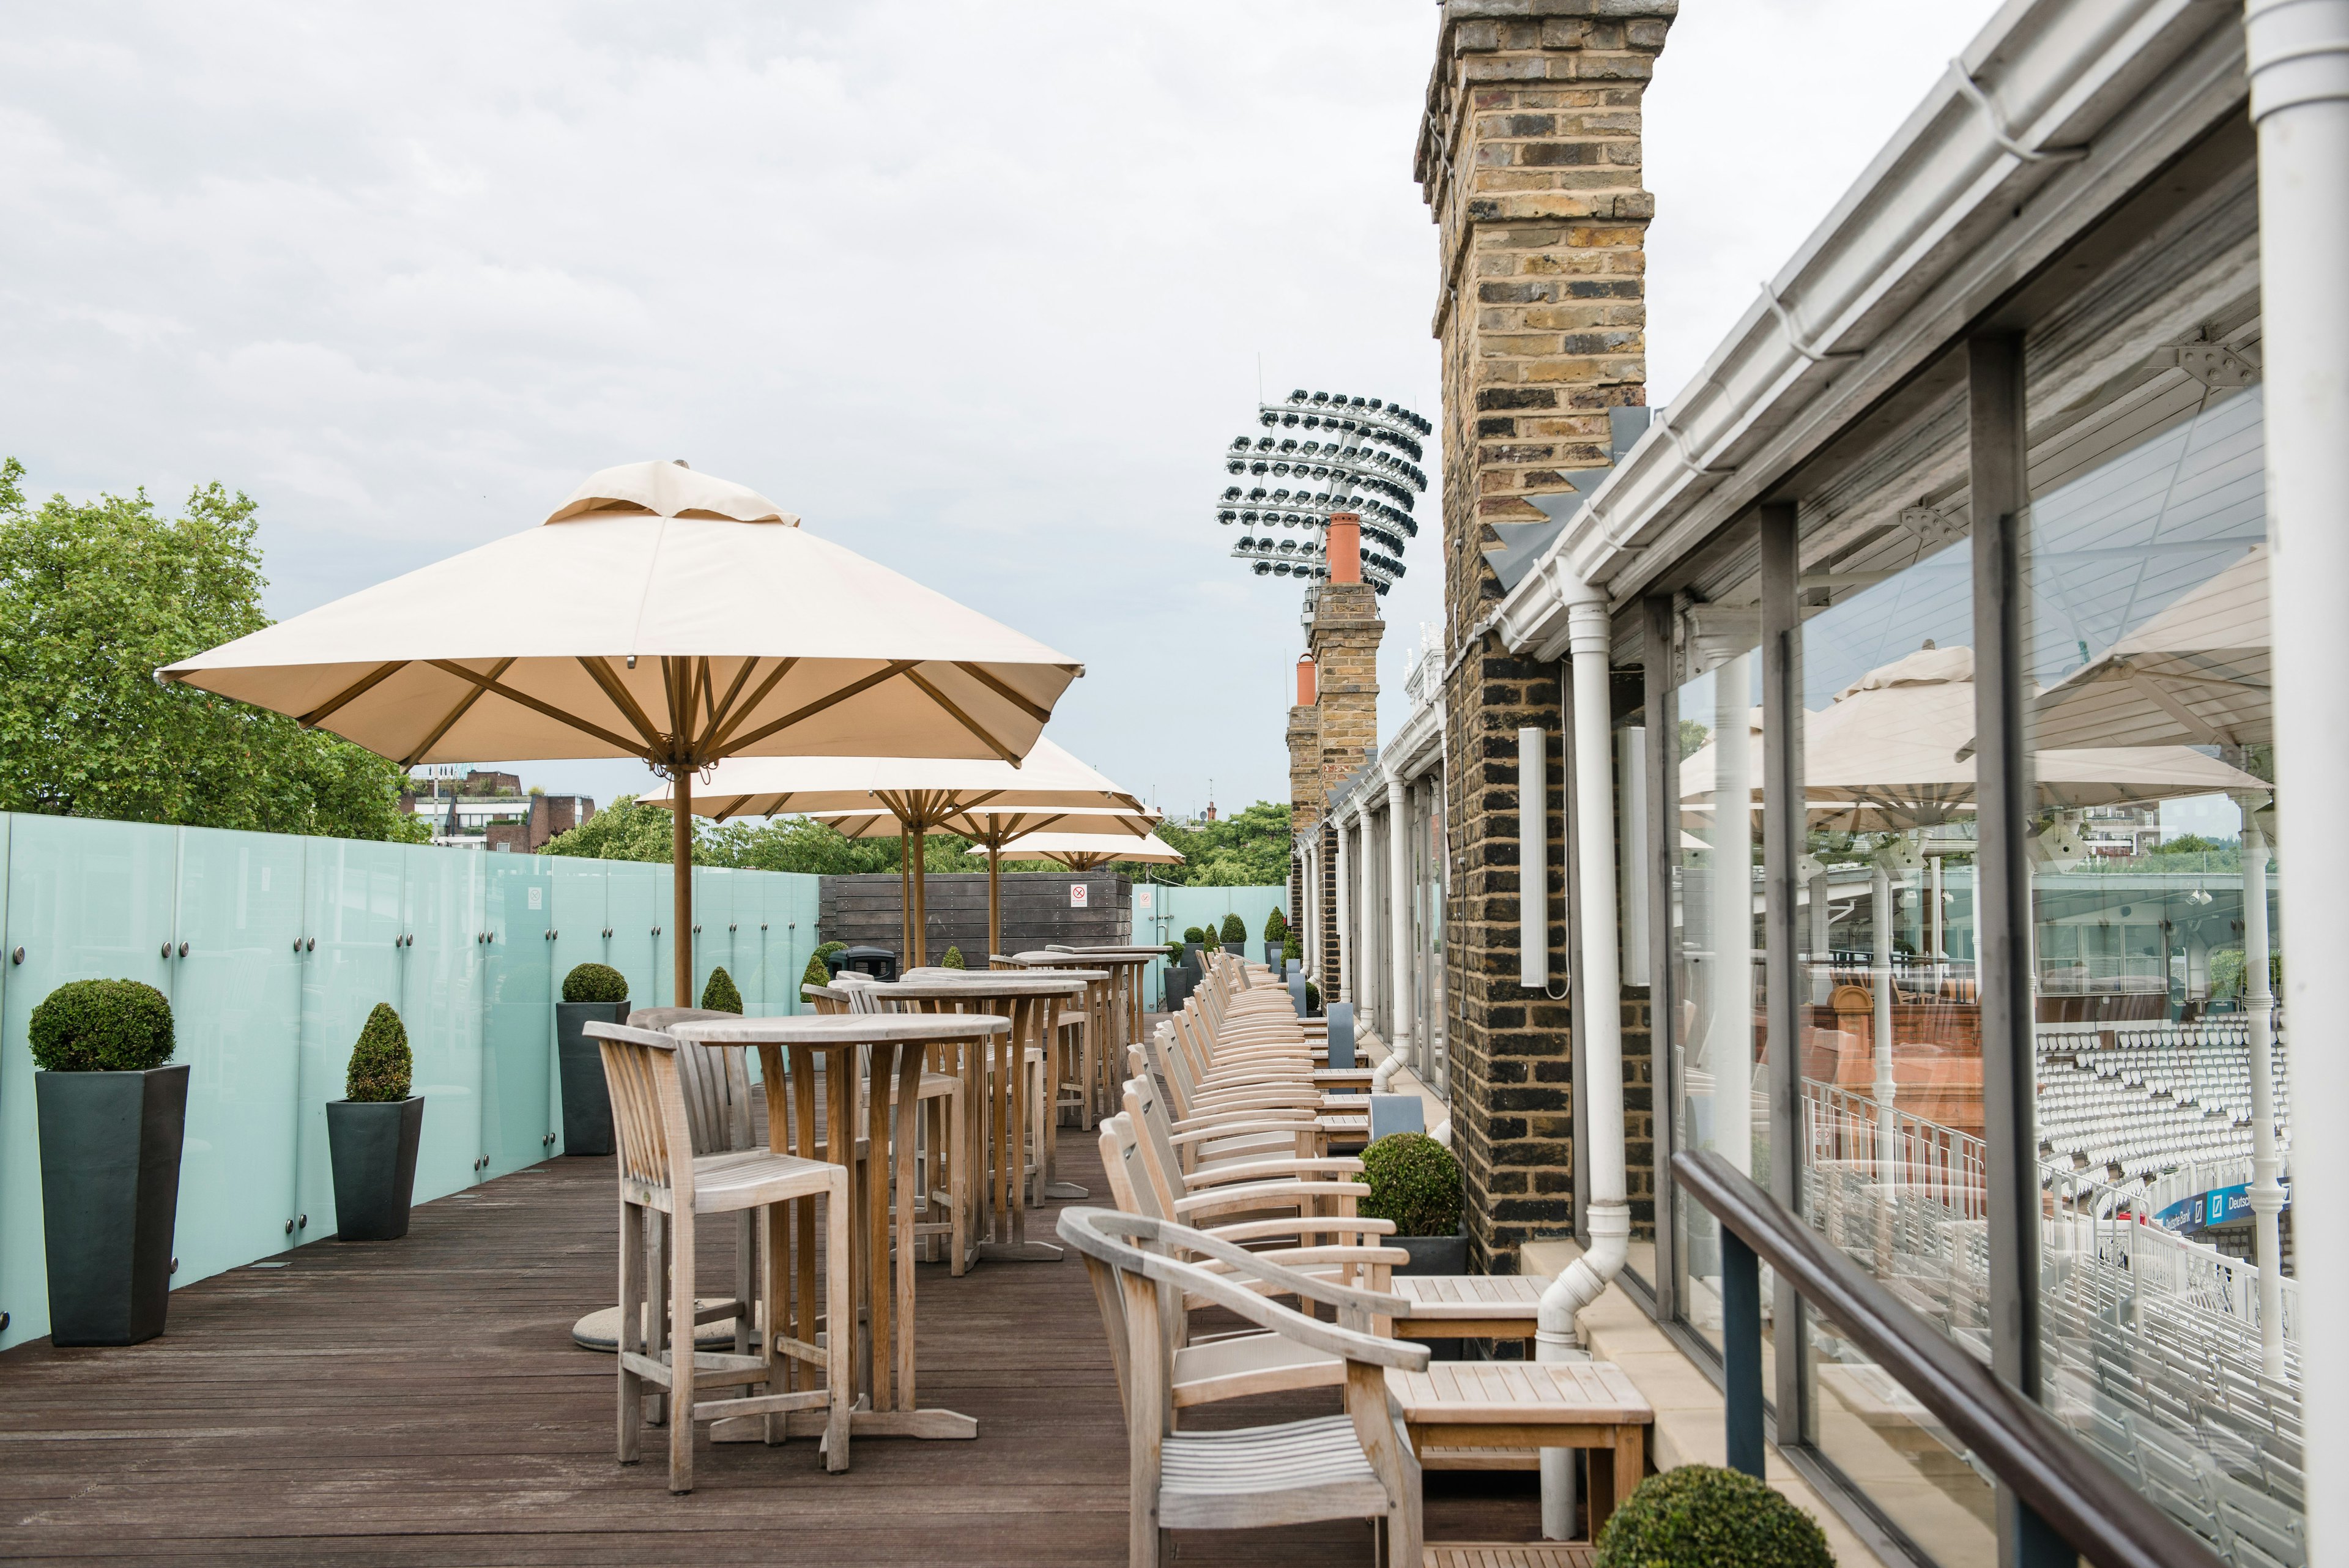 Summer Party Venues - Lord's Cricket Ground - Events in Pavilion Roof Terrace - Banner